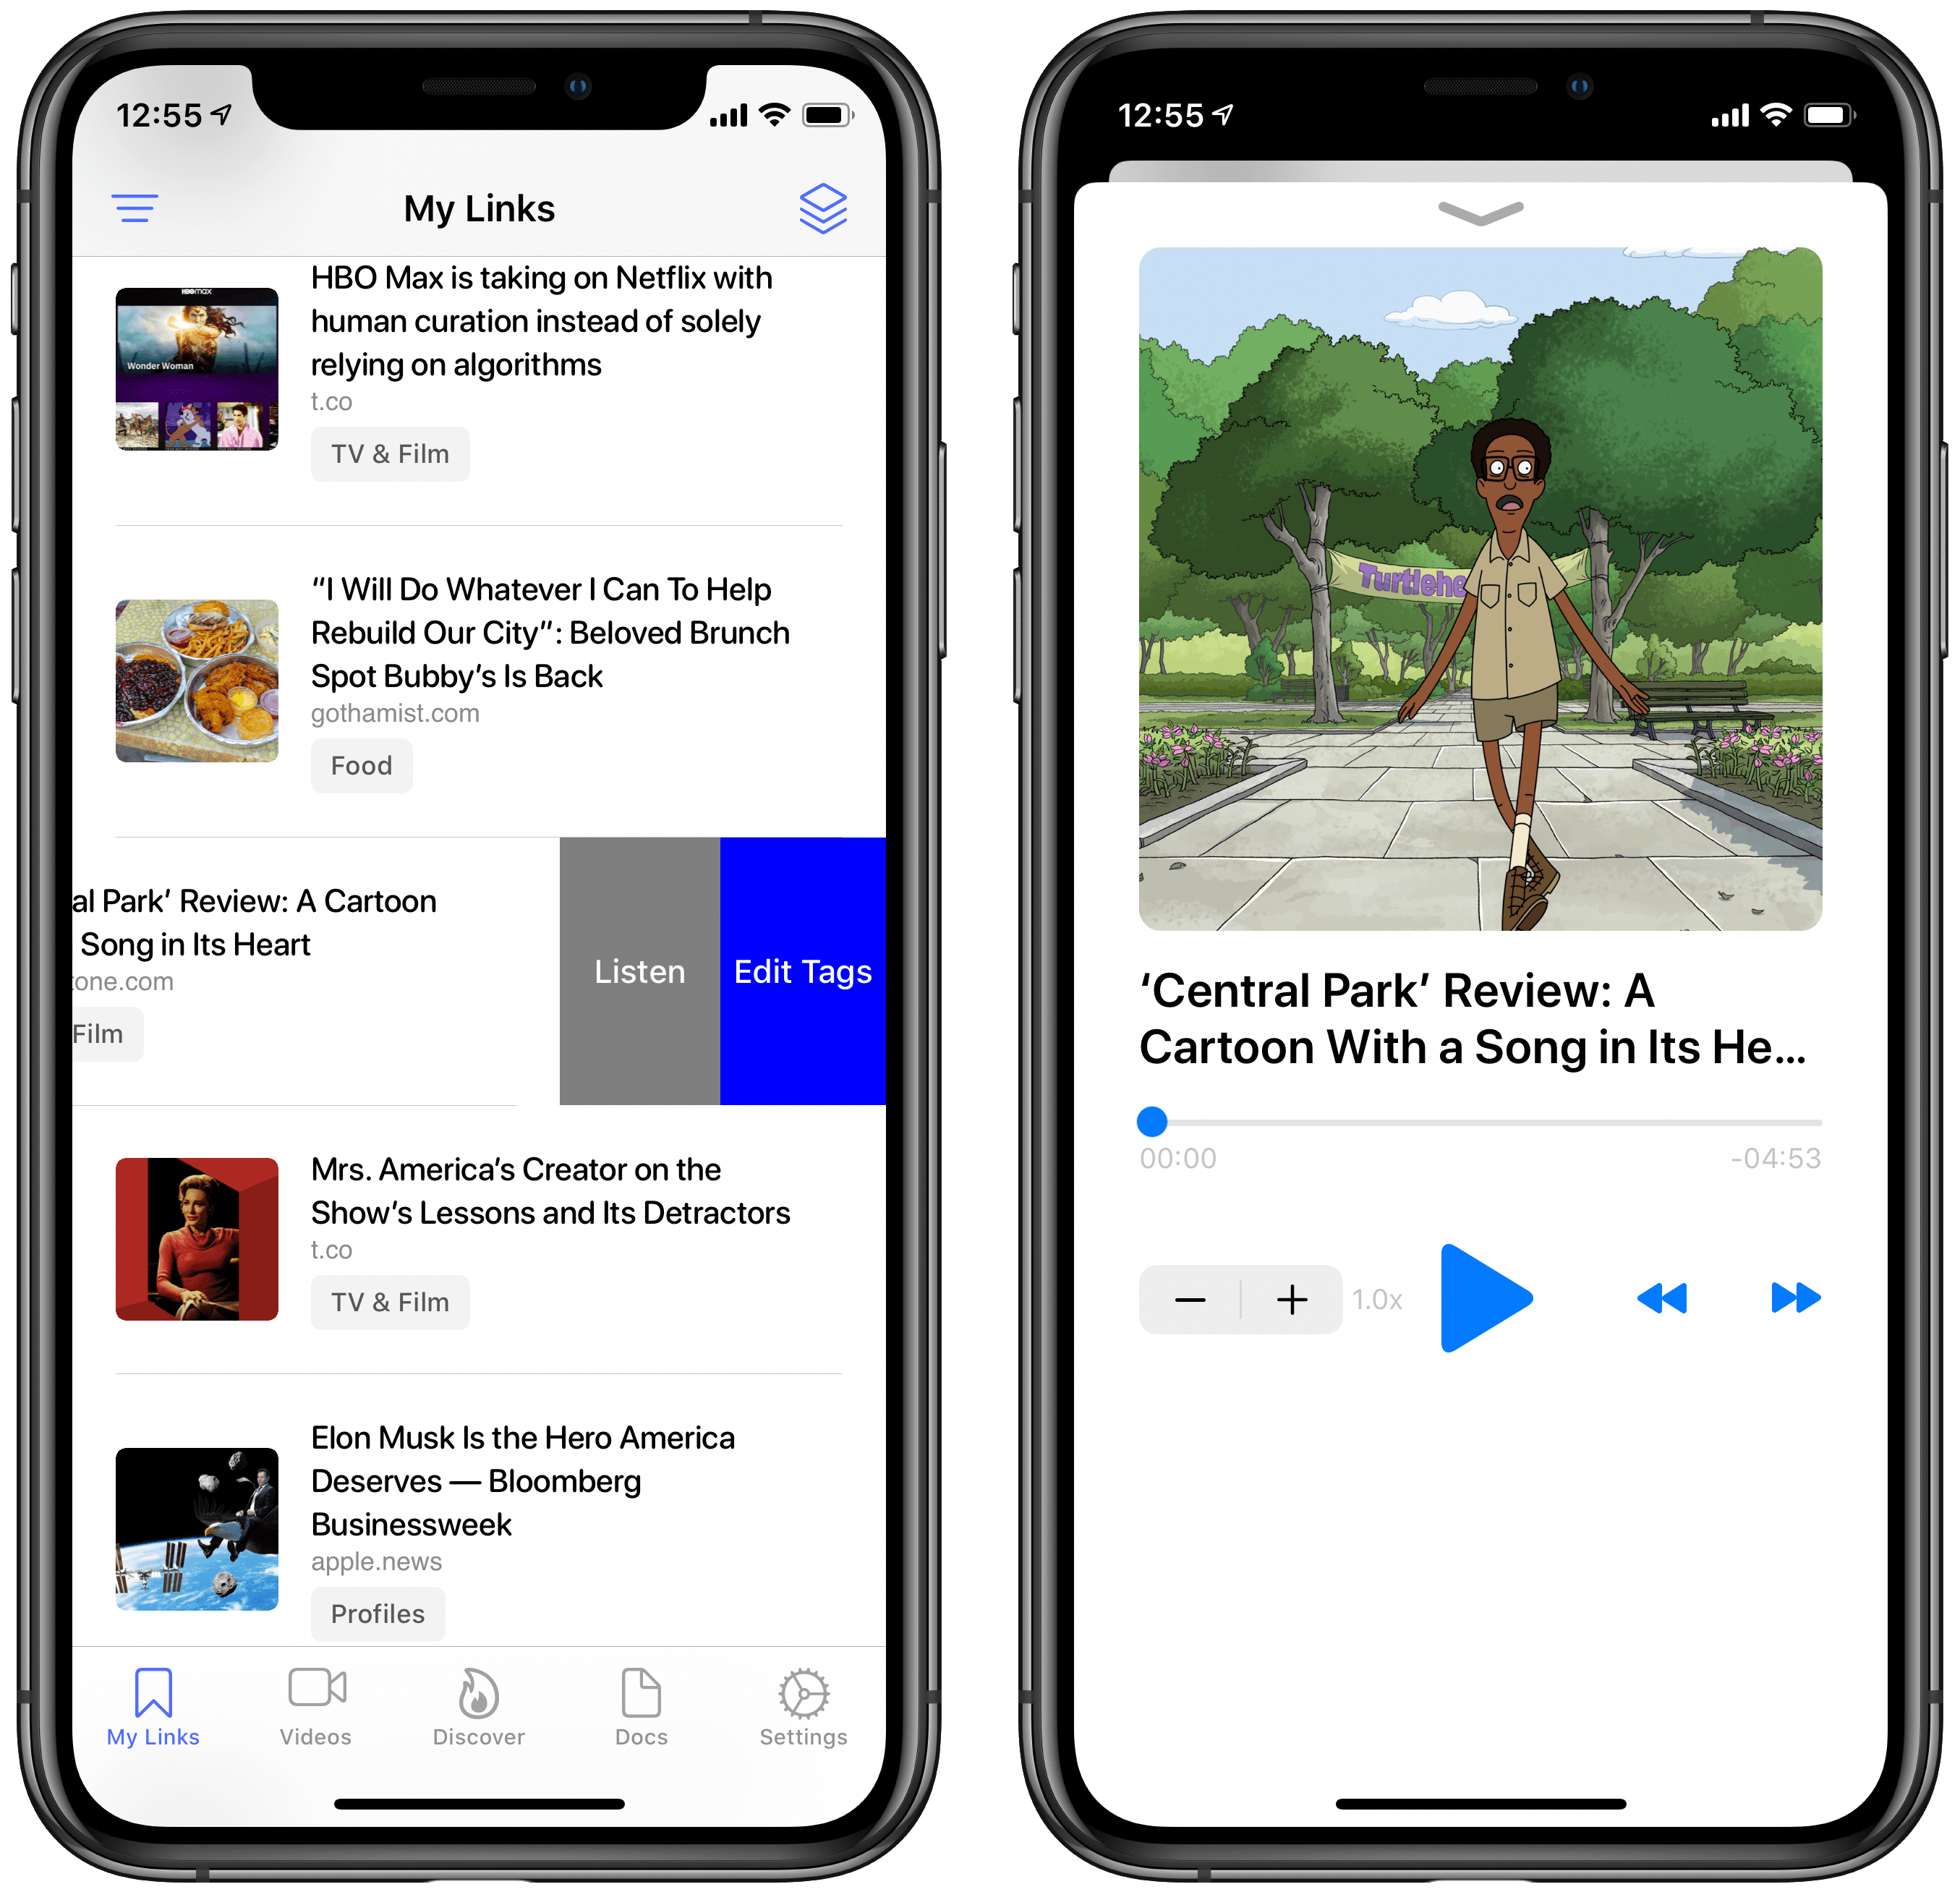 You can jump straight into listening mode using a custom swipe gesture.